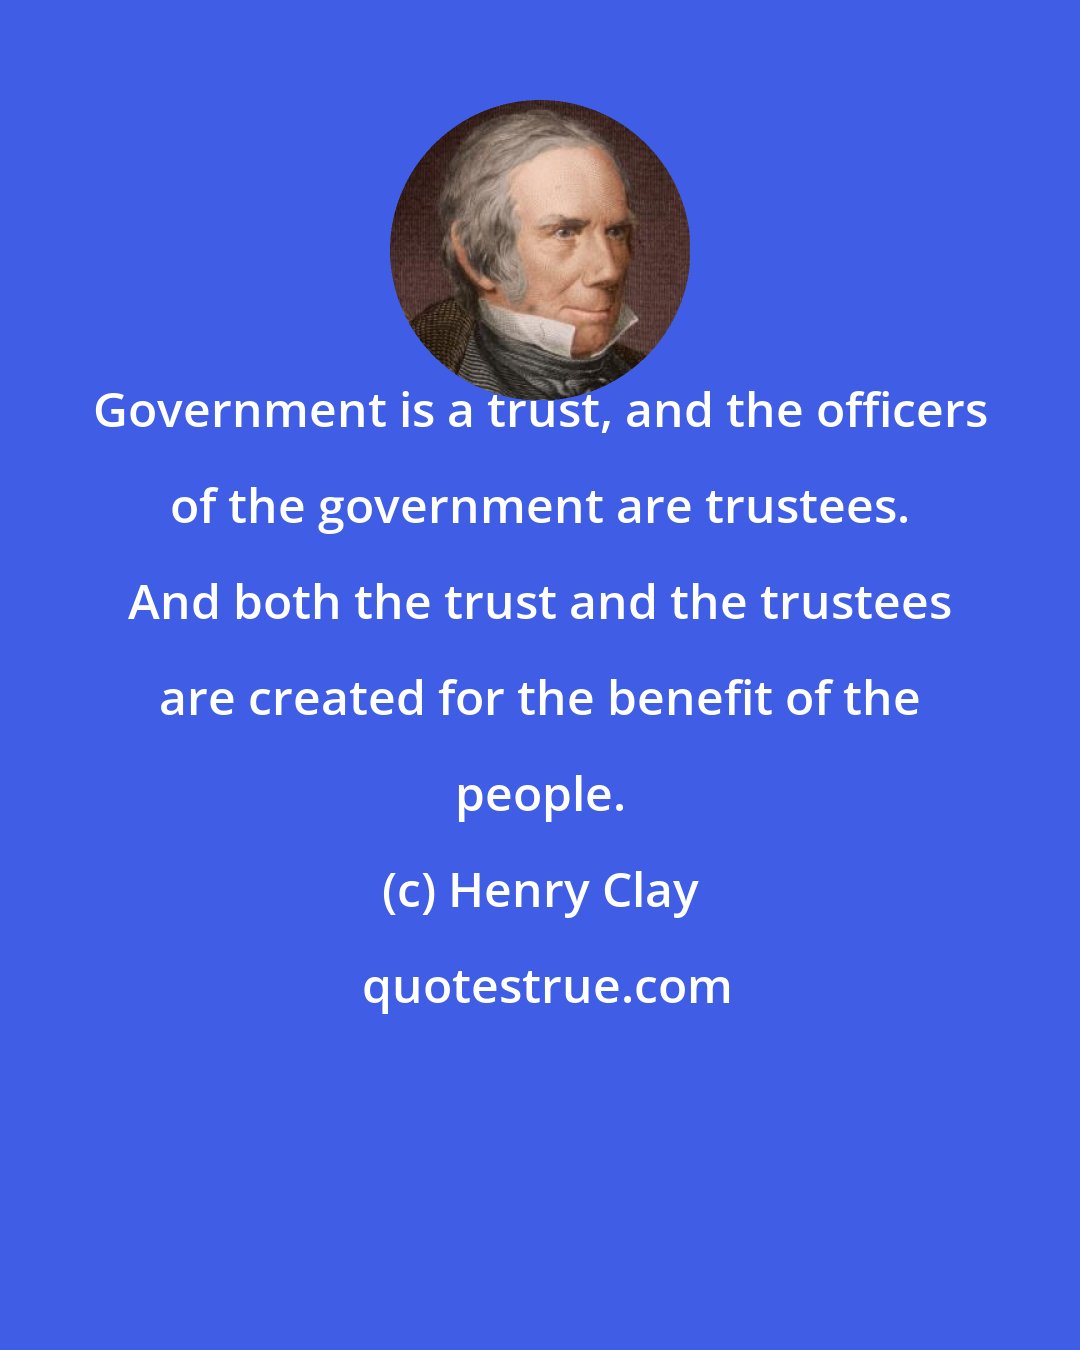 Henry Clay: Government is a trust, and the officers of the government are trustees. And both the trust and the trustees are created for the benefit of the people.